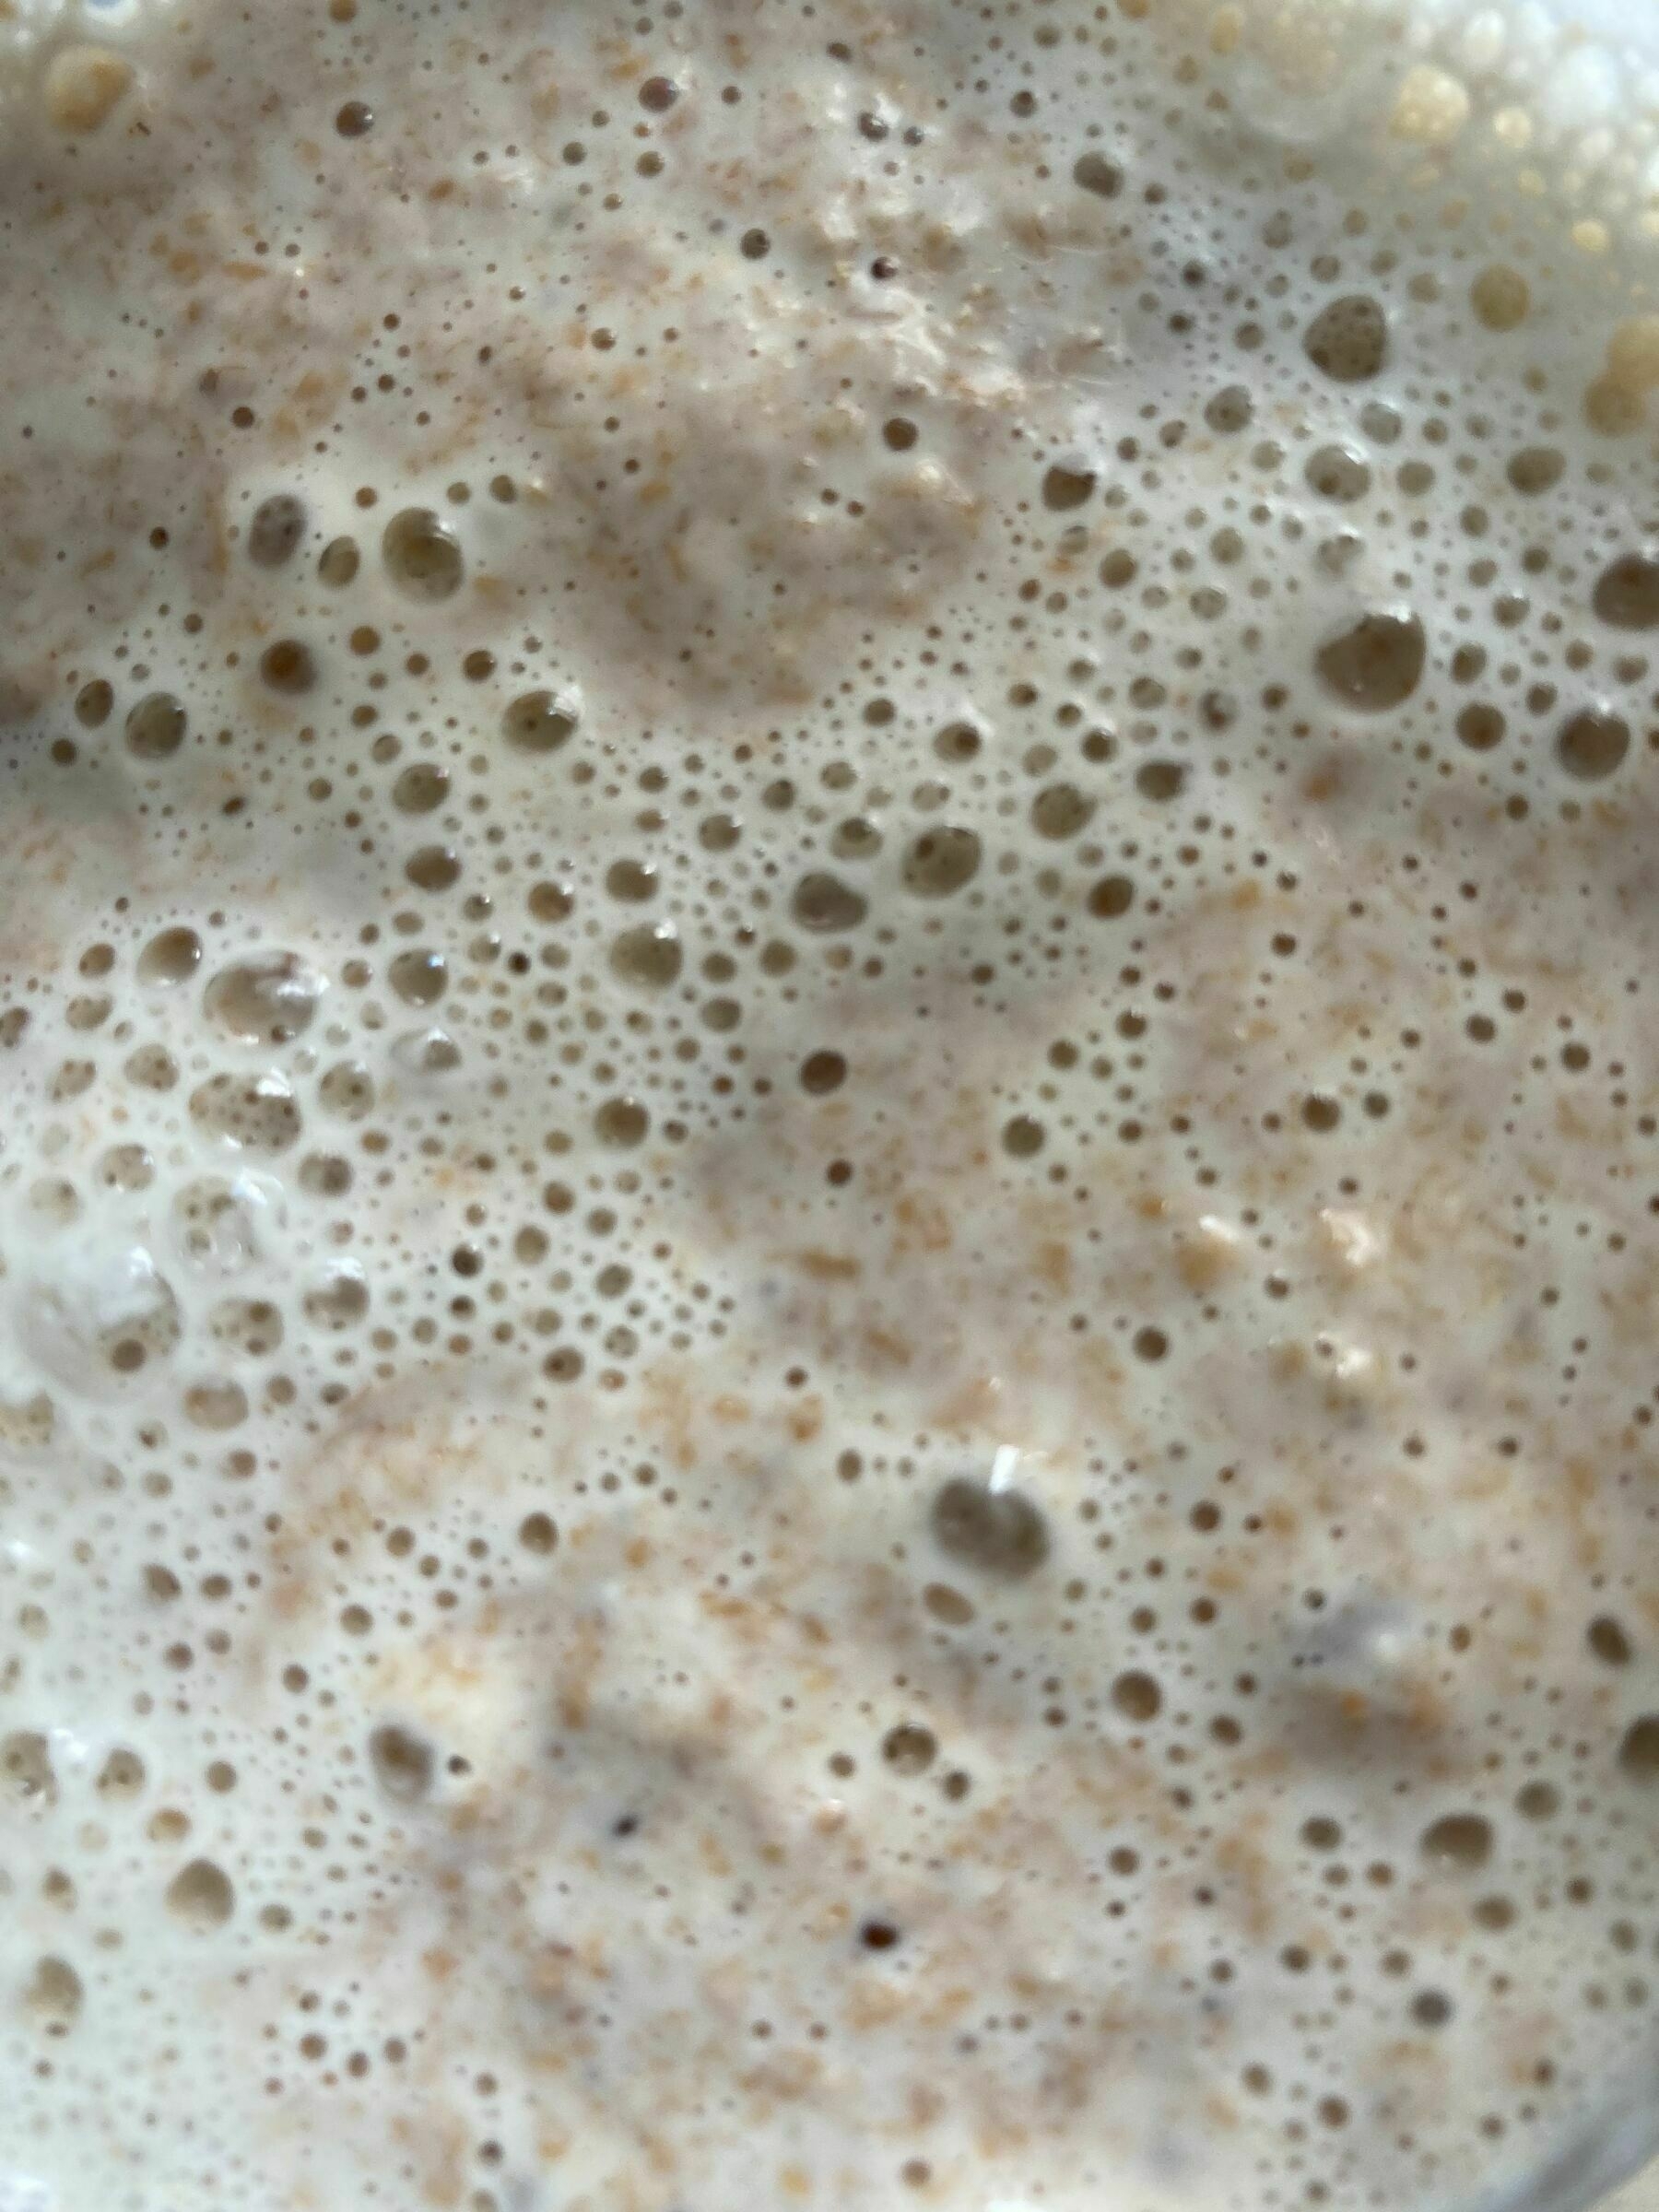 Thhe bubbling surface of a sourdough starter.